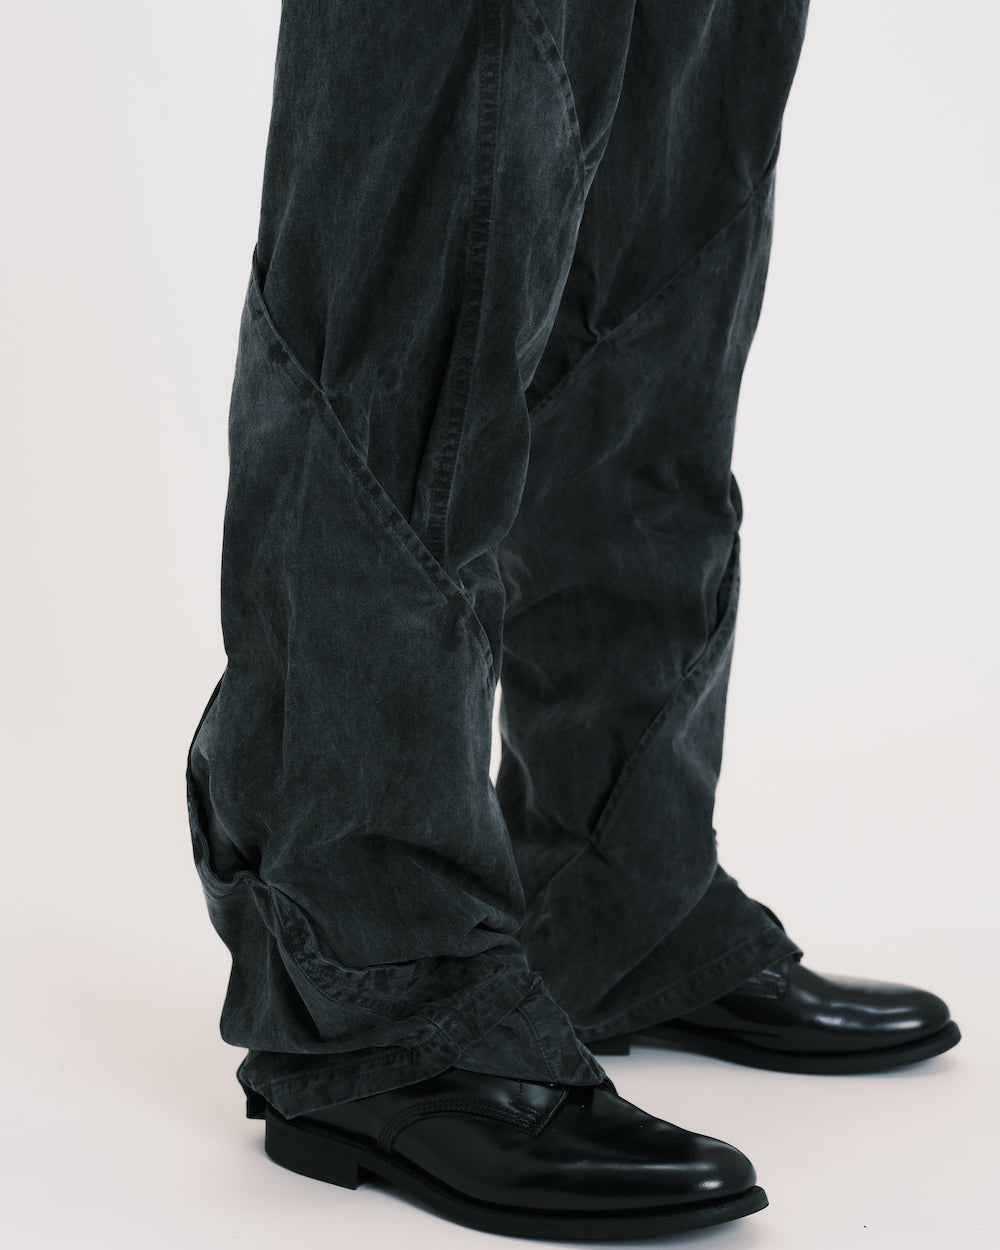 Gather-Twisted Dye Shell Trousers